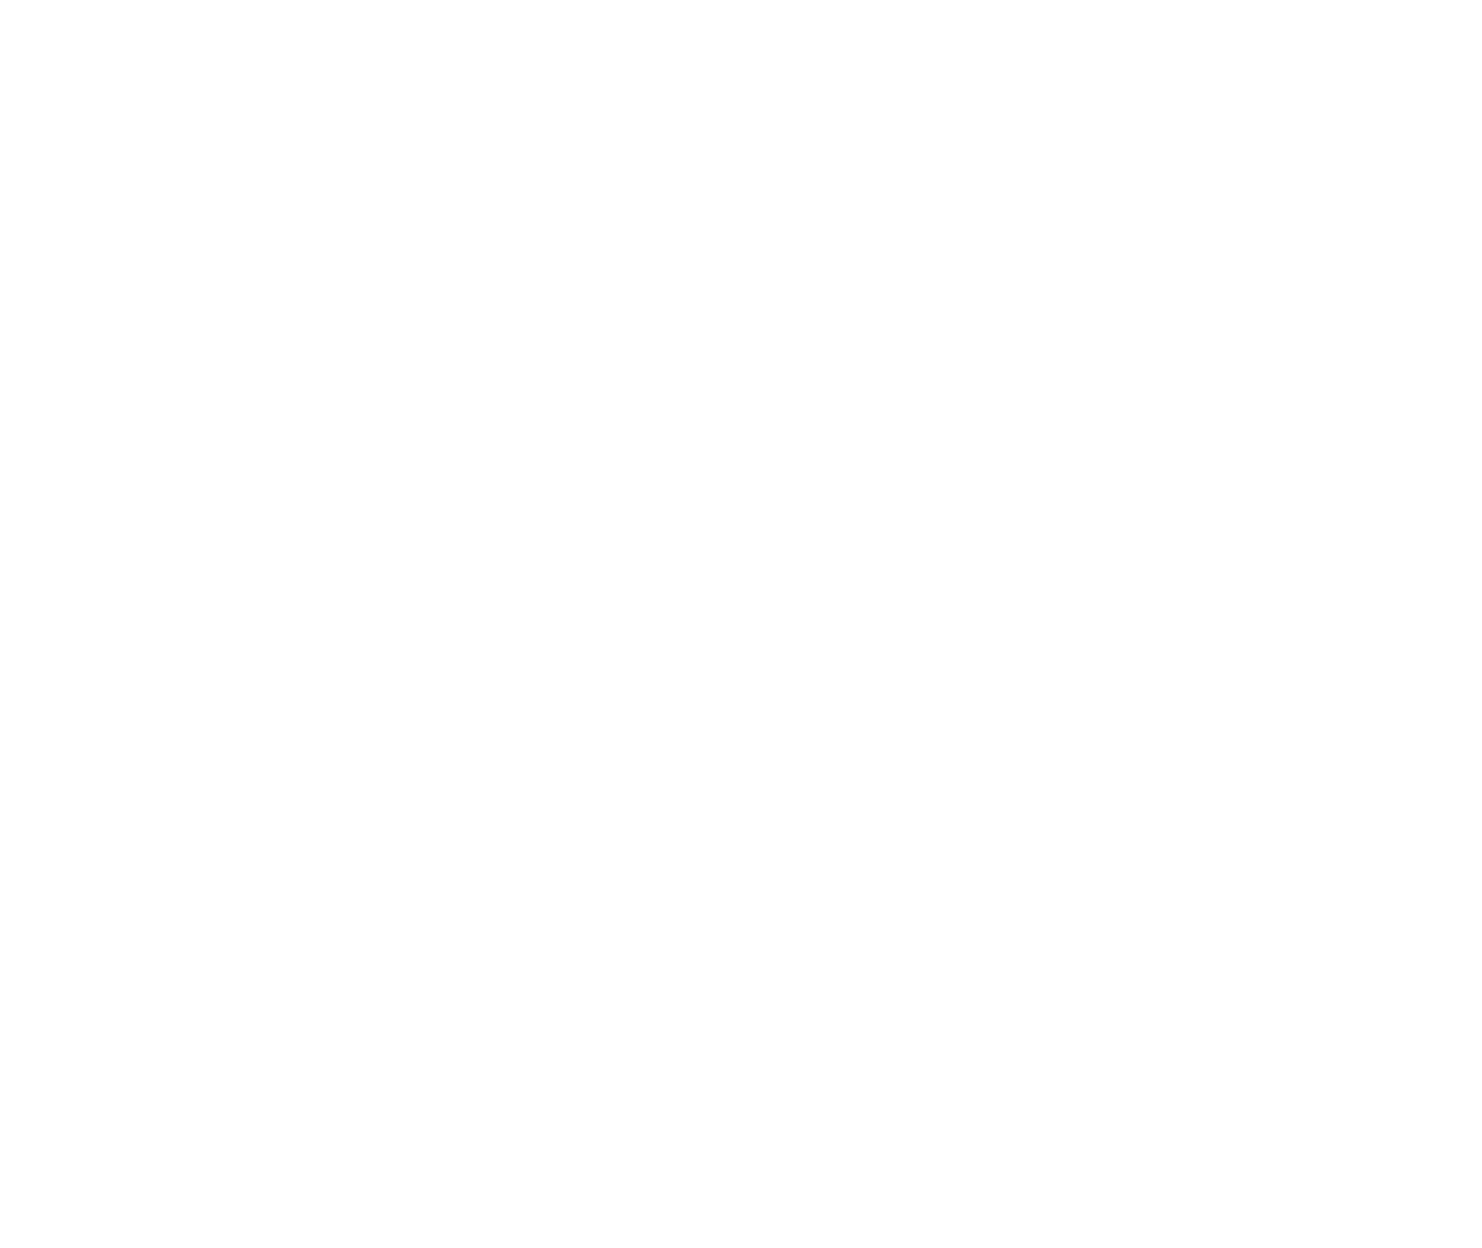 Childcare worldwide launched a beautiful sponsorship site